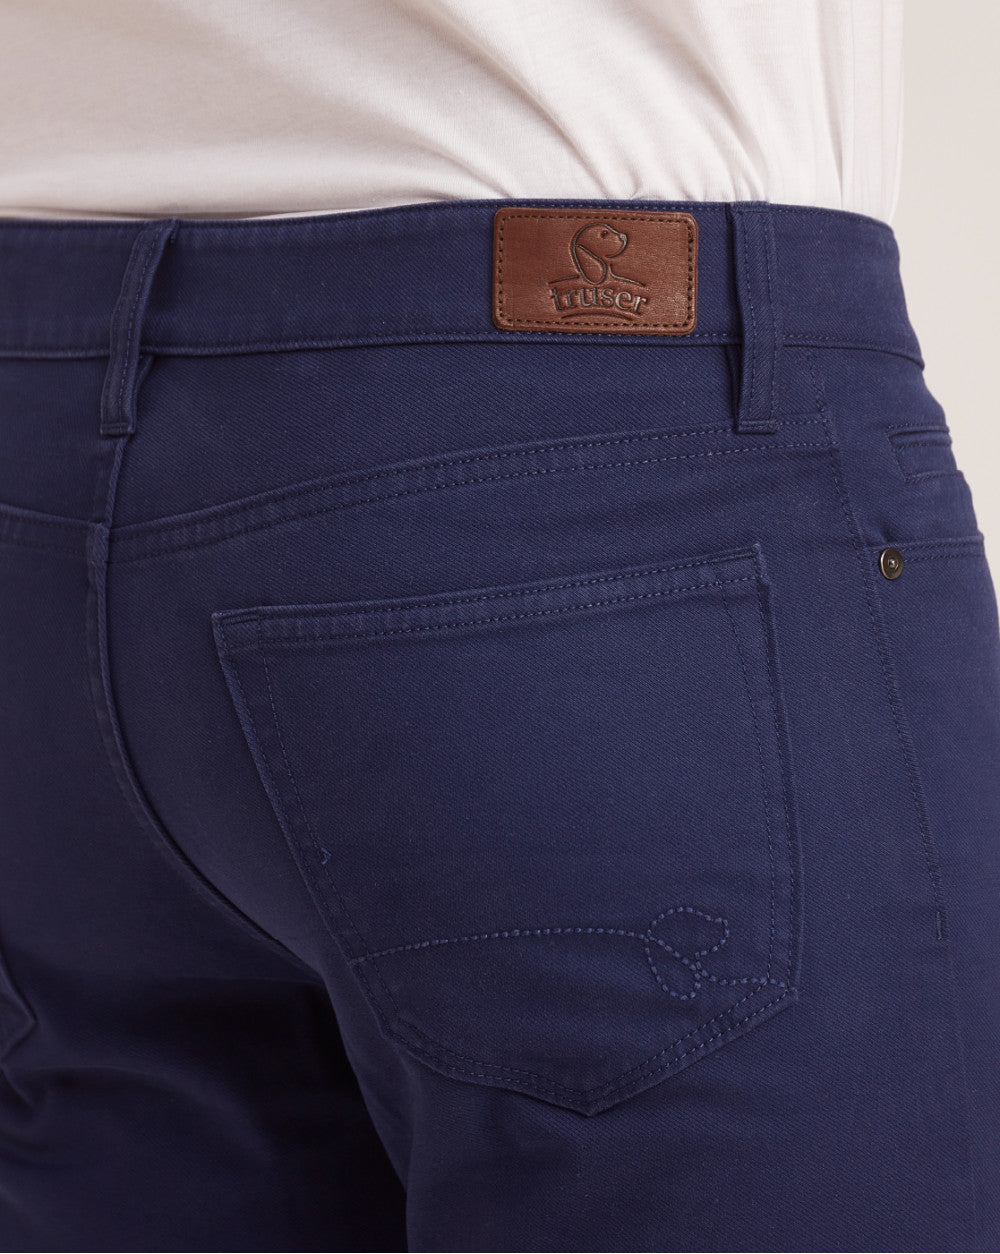 Slim Fit Five-Pocket Luxe Pants - Bright Navy